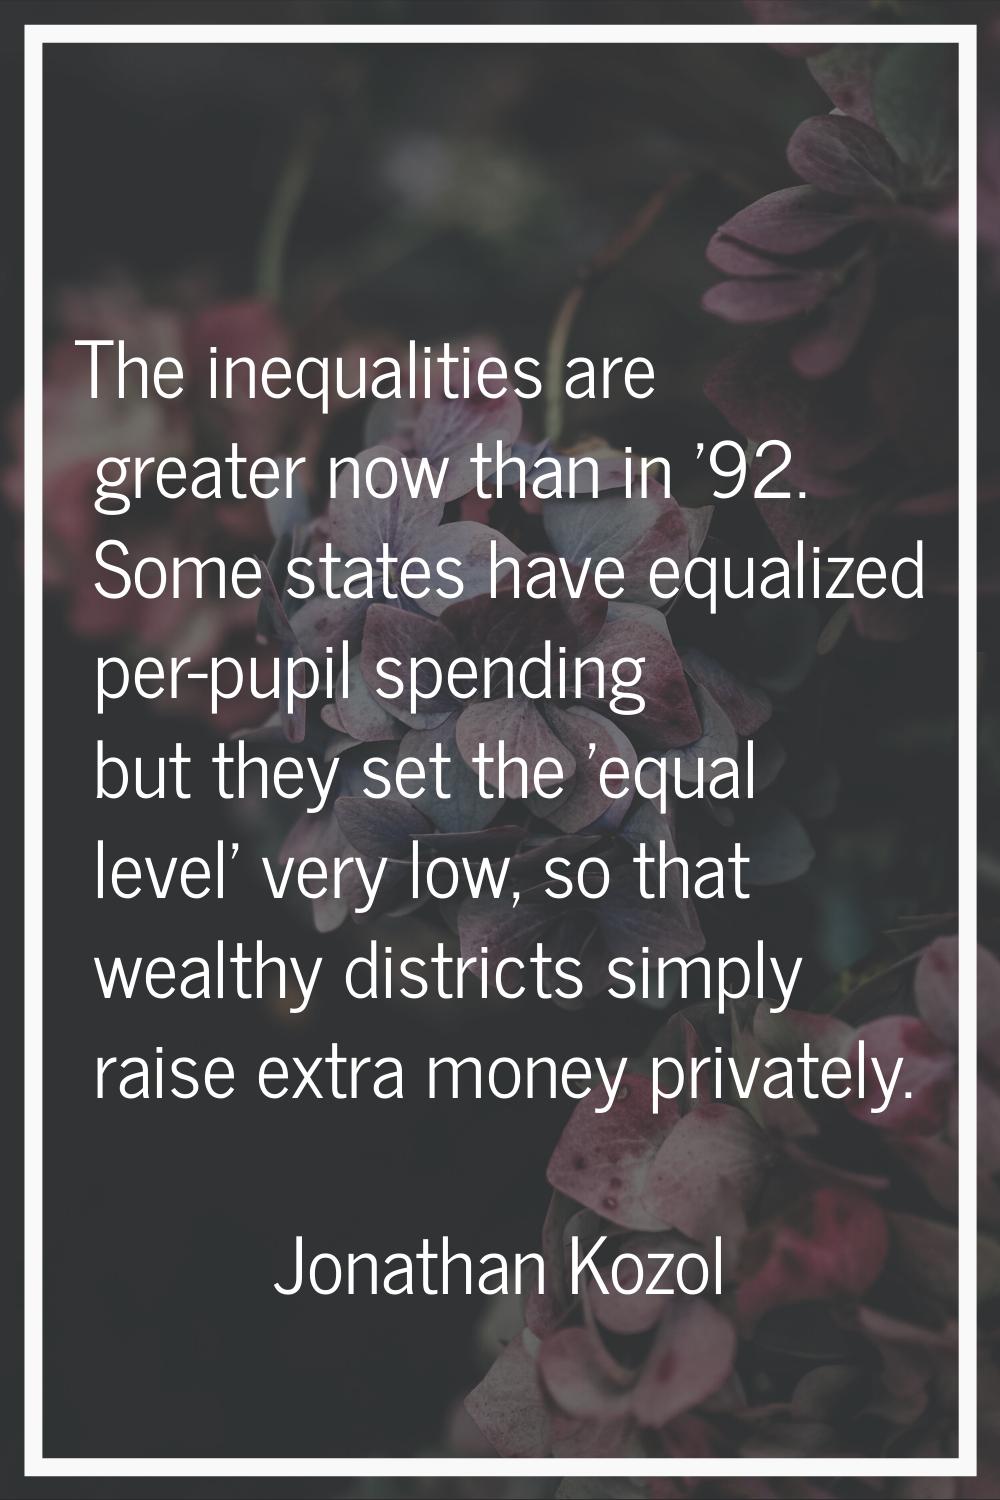 The inequalities are greater now than in '92. Some states have equalized per-pupil spending but the